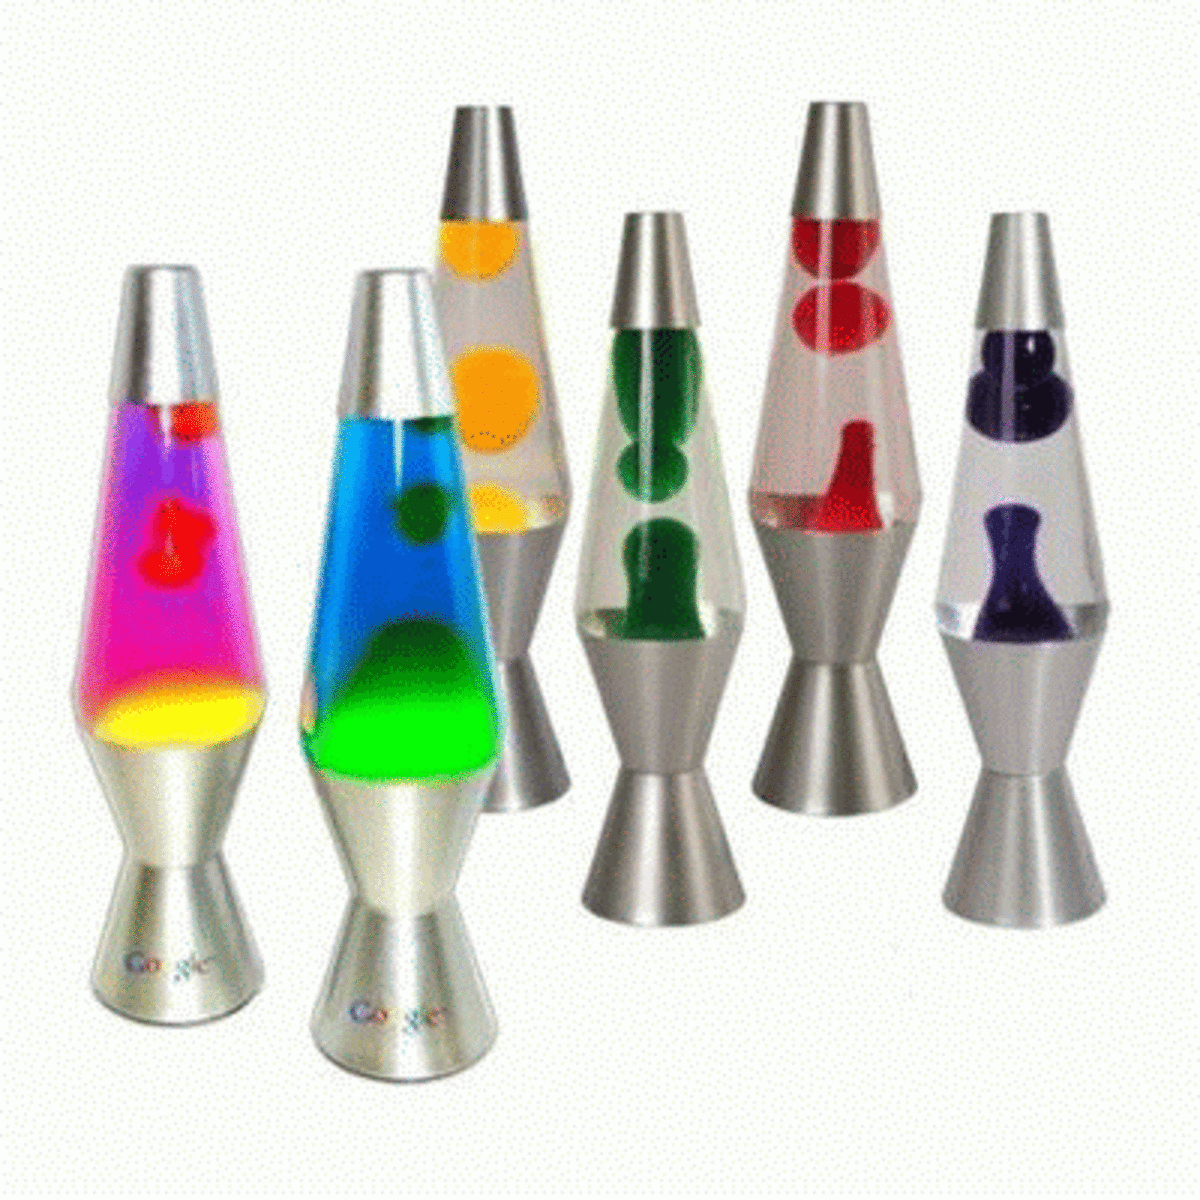 Lava Lamps come in many different shapes and sizes.